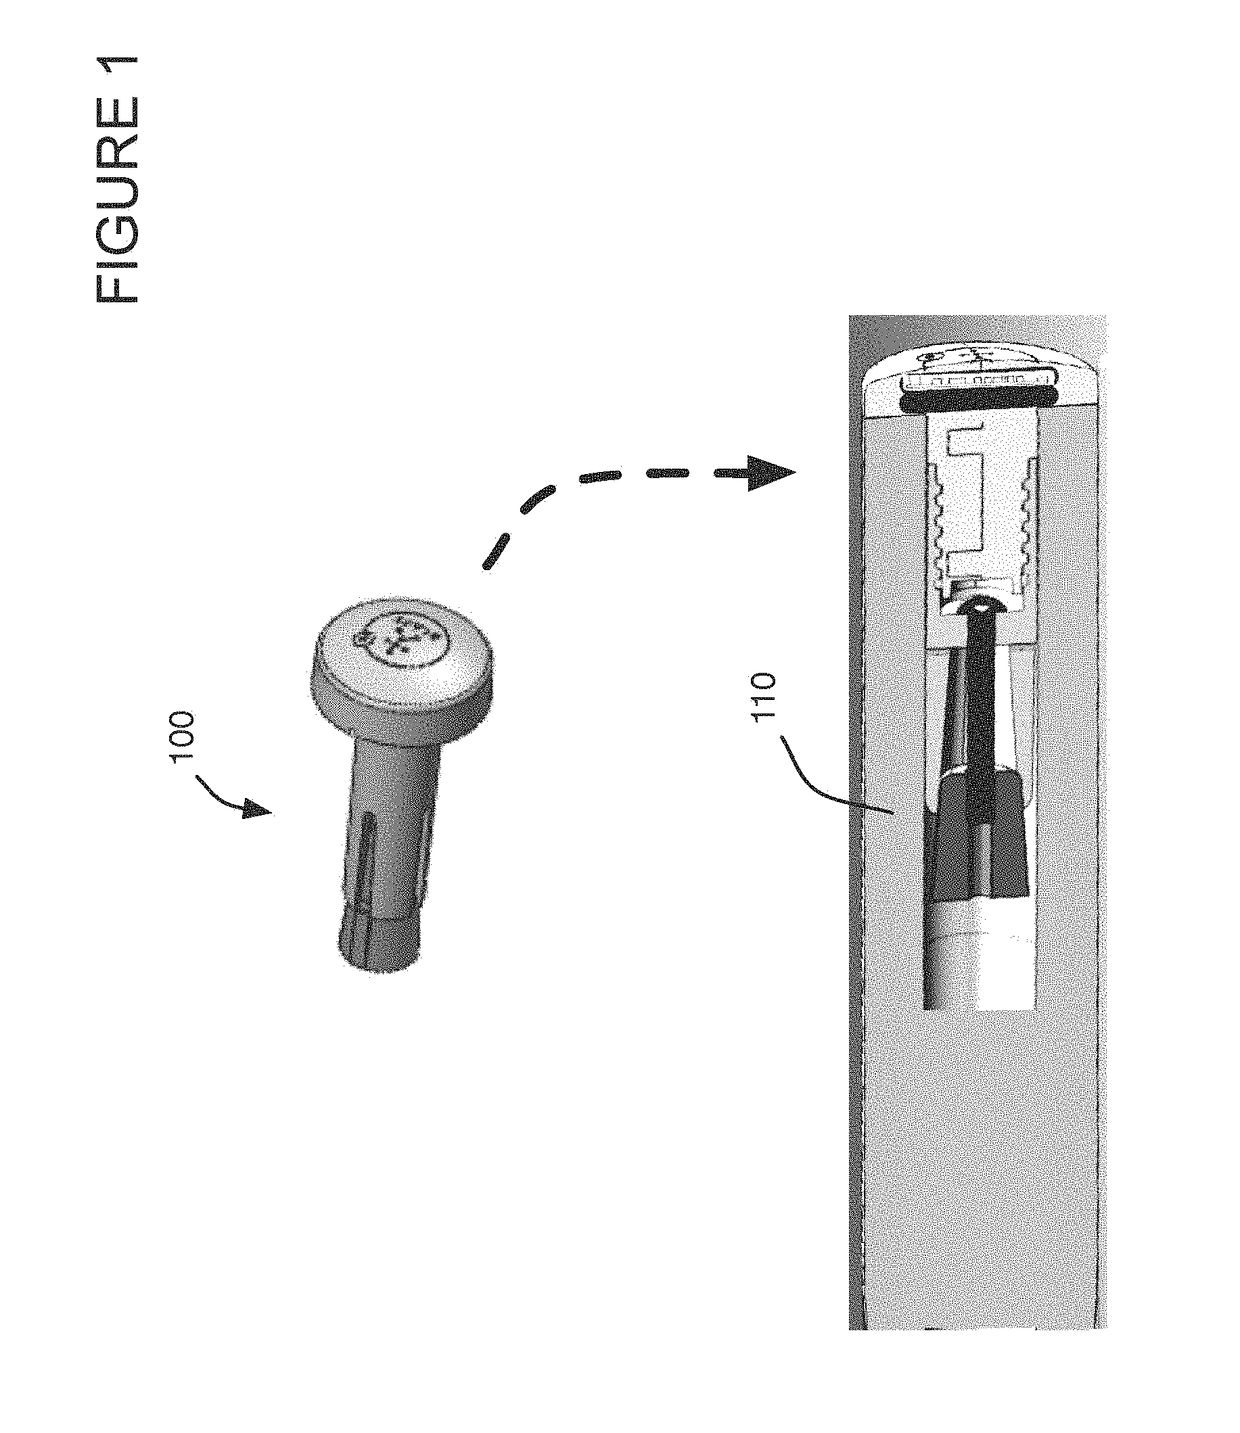 Method of coupling a motion sensor to a piece of equipment